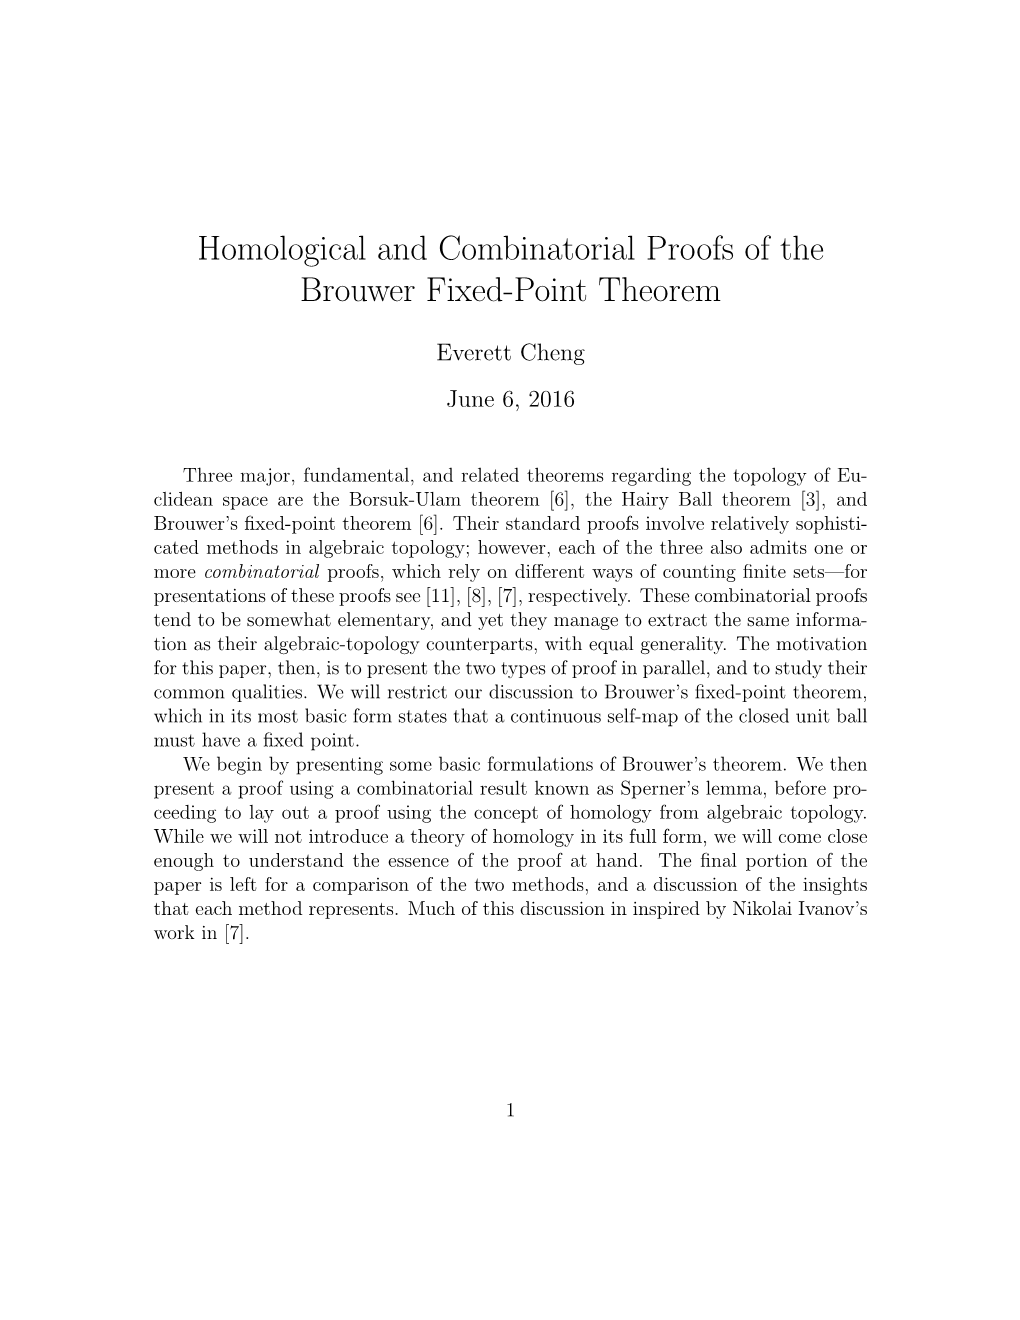 Homological and Combinatorial Proofs of the Brouwer Fixed-Point Theorem